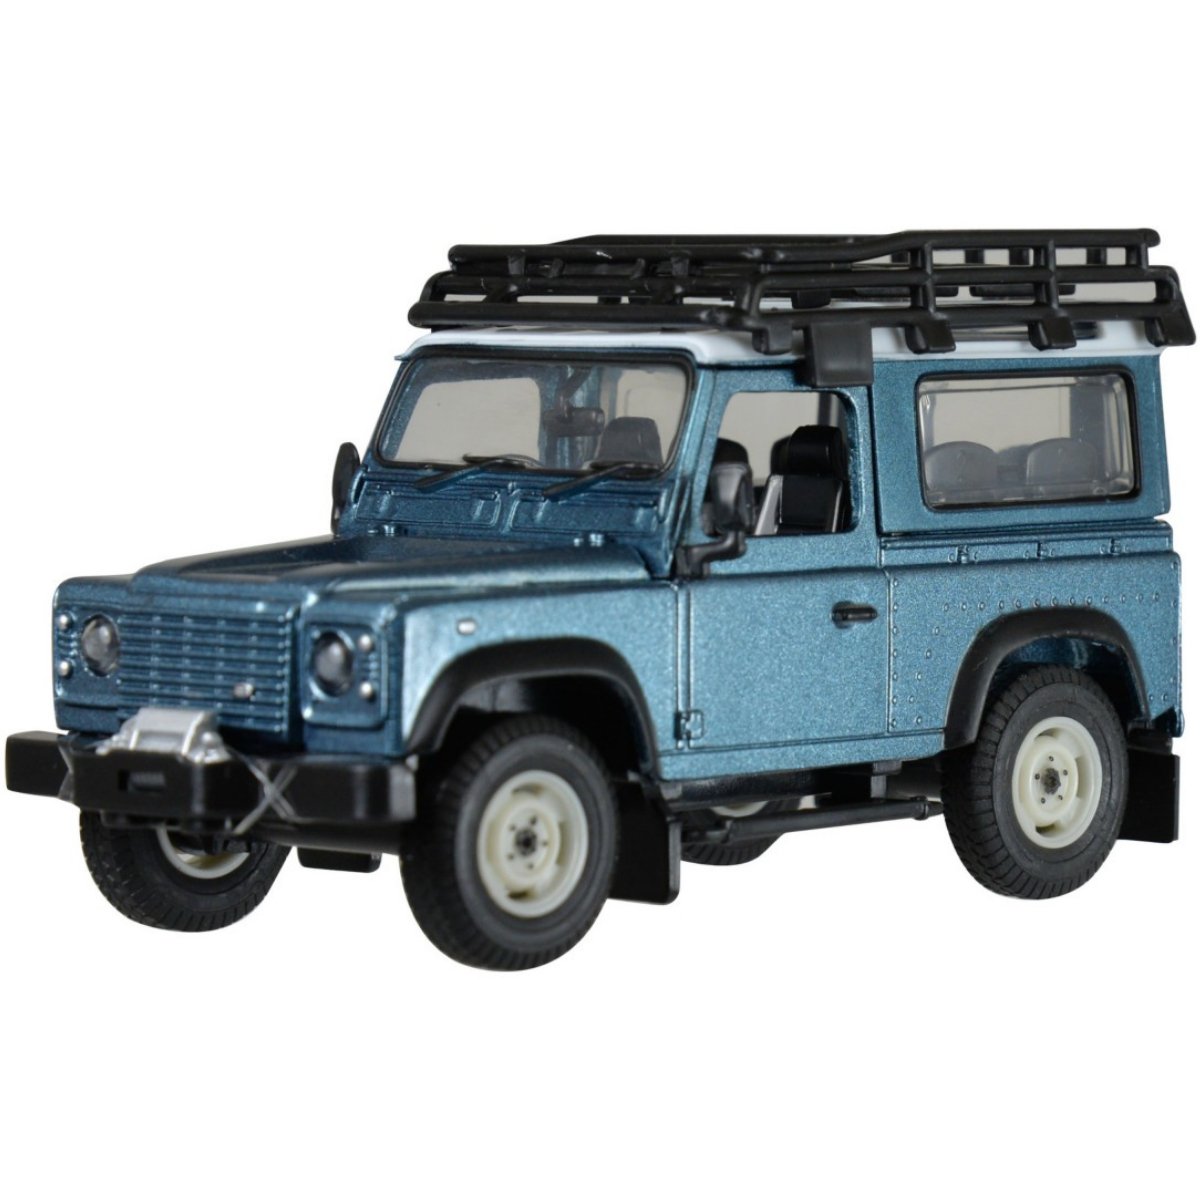 Britains Land Rover Defender & Roof Rack & Winch - 1:32 Scale - Phillips Hobbies